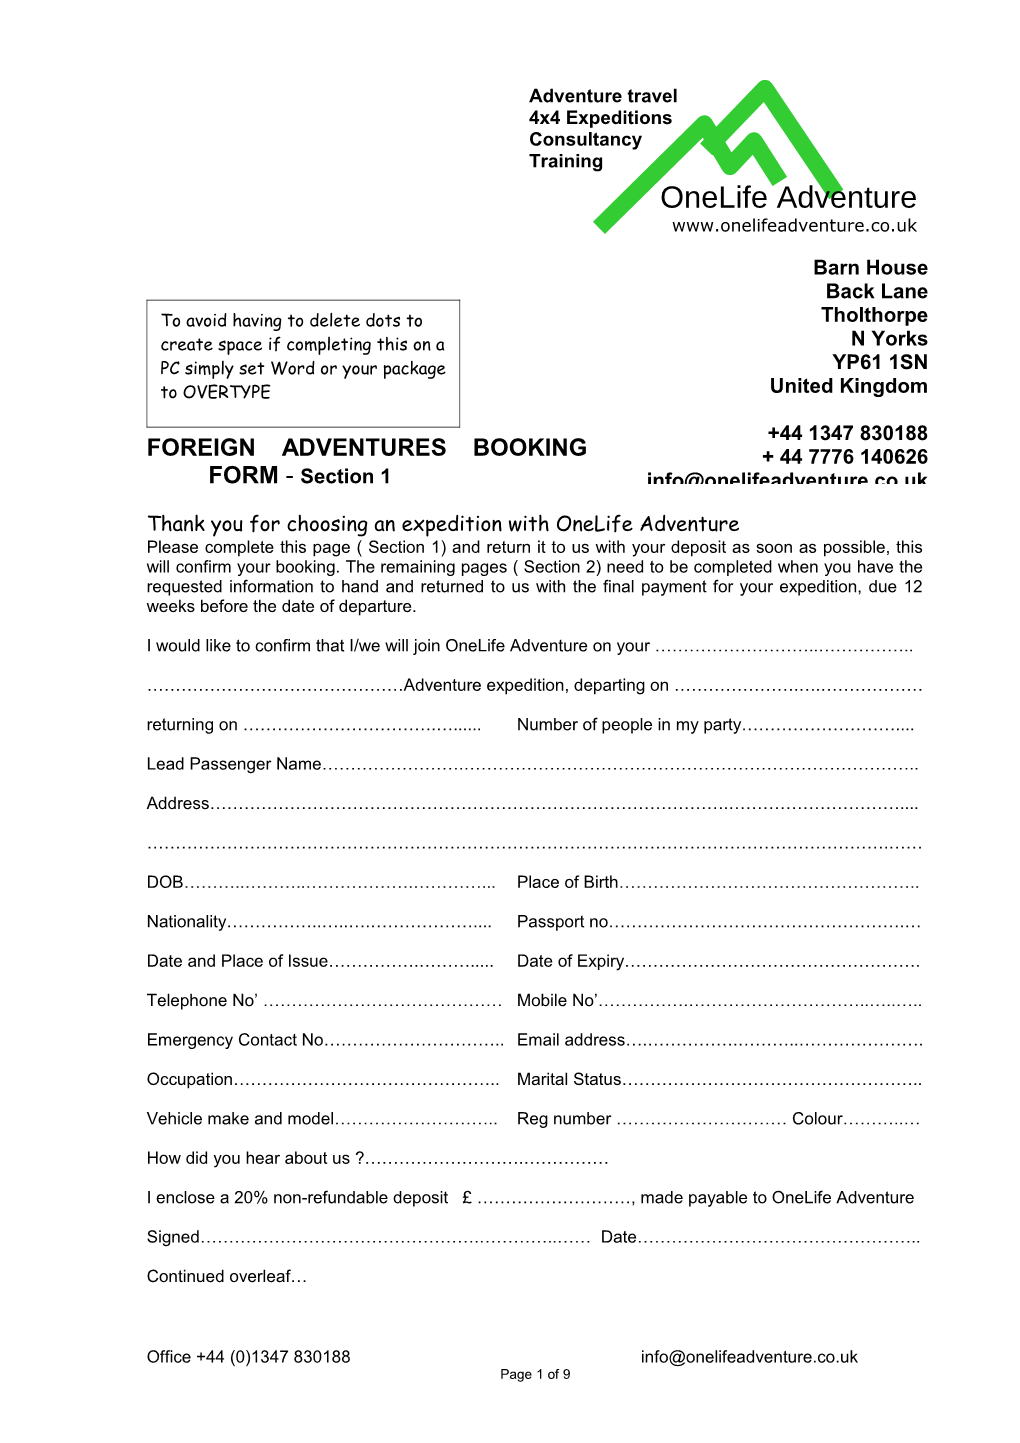 FOREIGN ADVENTURES BOOKING FORM - Section 1